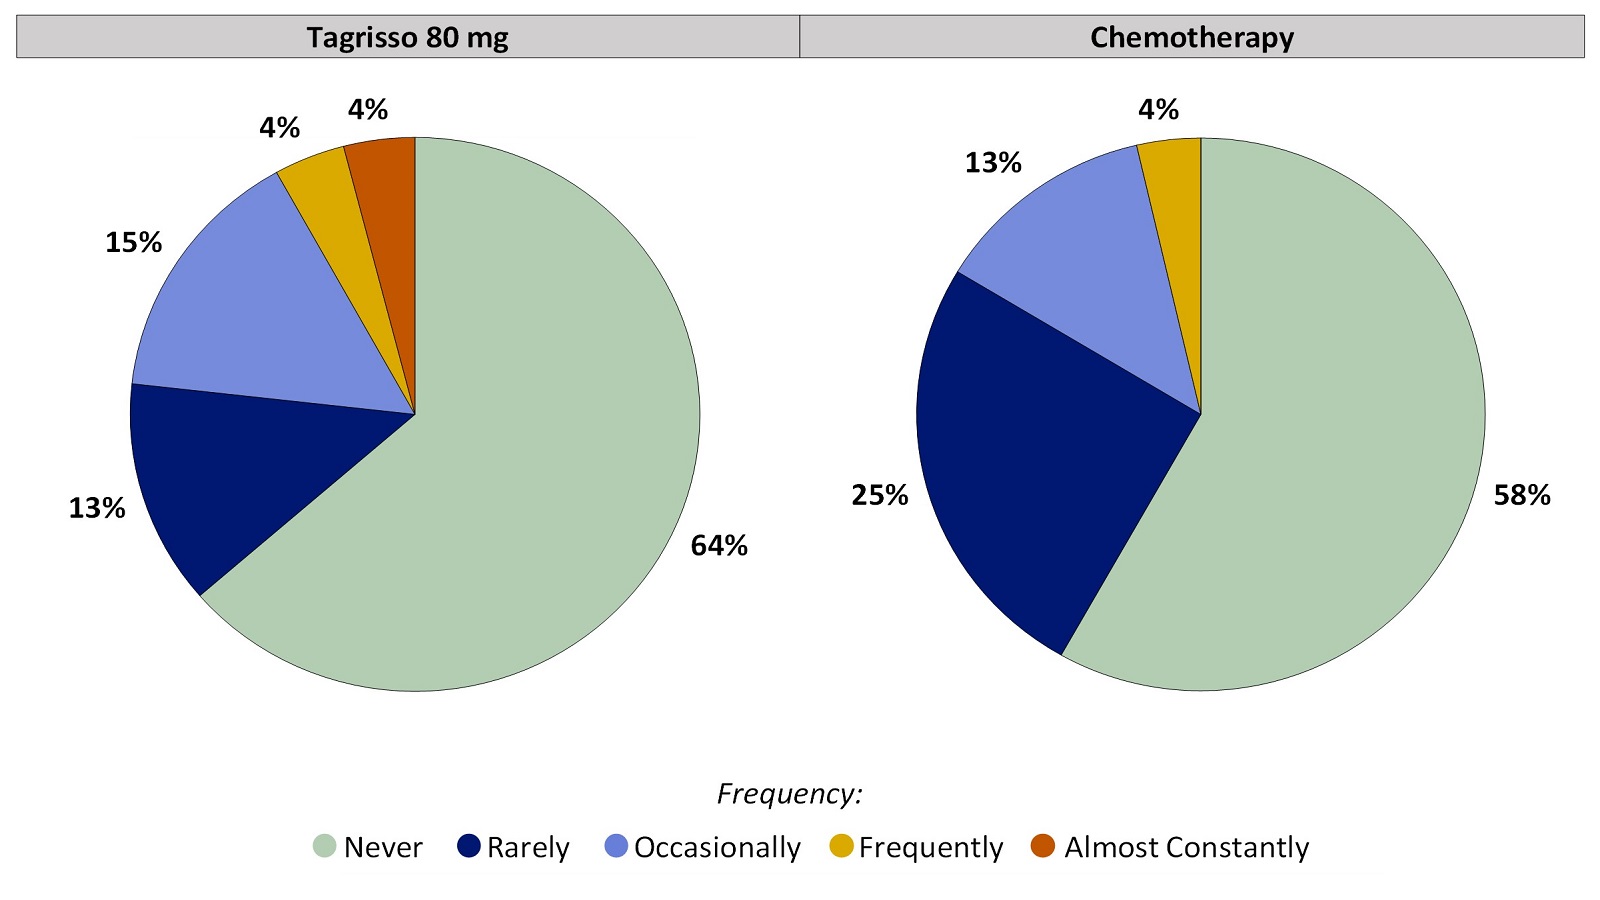 Two pie charts, one for Tagrisso and the other for chemotherapy, summarizing the percentage of patients by worst reported Loss of Control of Bowel Movements during the first 24 weeks of the clinical trial. In the Tagrisso arm, Never (64%), Rarely (13%), Occasionally (15%), Frequently (4%) and Almost constantly (4%). In the chemotherapy arm, Never (58%), Rarely (25%), Occasionally (13%), Frequently (4%) and Almost constantly (0%).